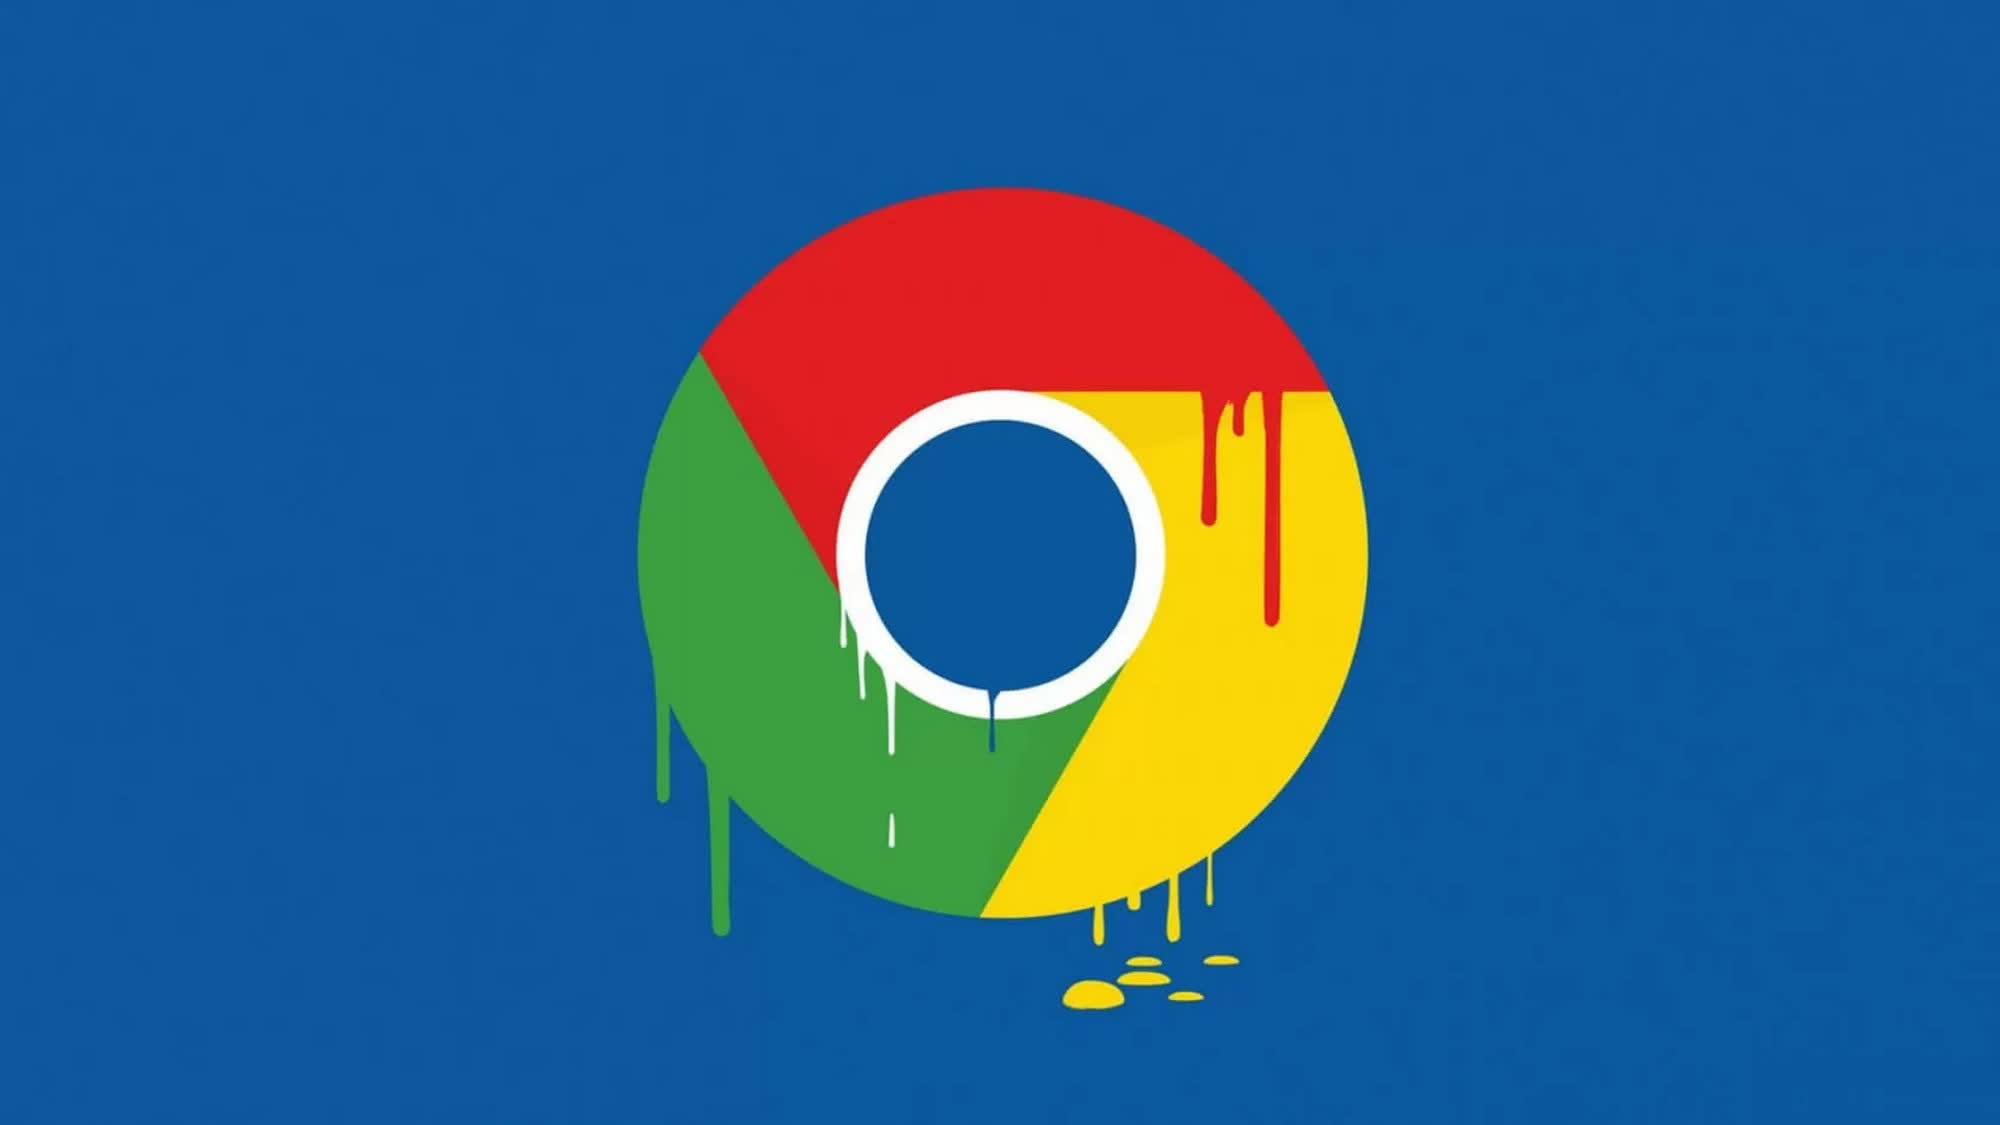 Three malicious VPN extensions on the Chrome Web Store infected 1.5 million devices before being removed by Google